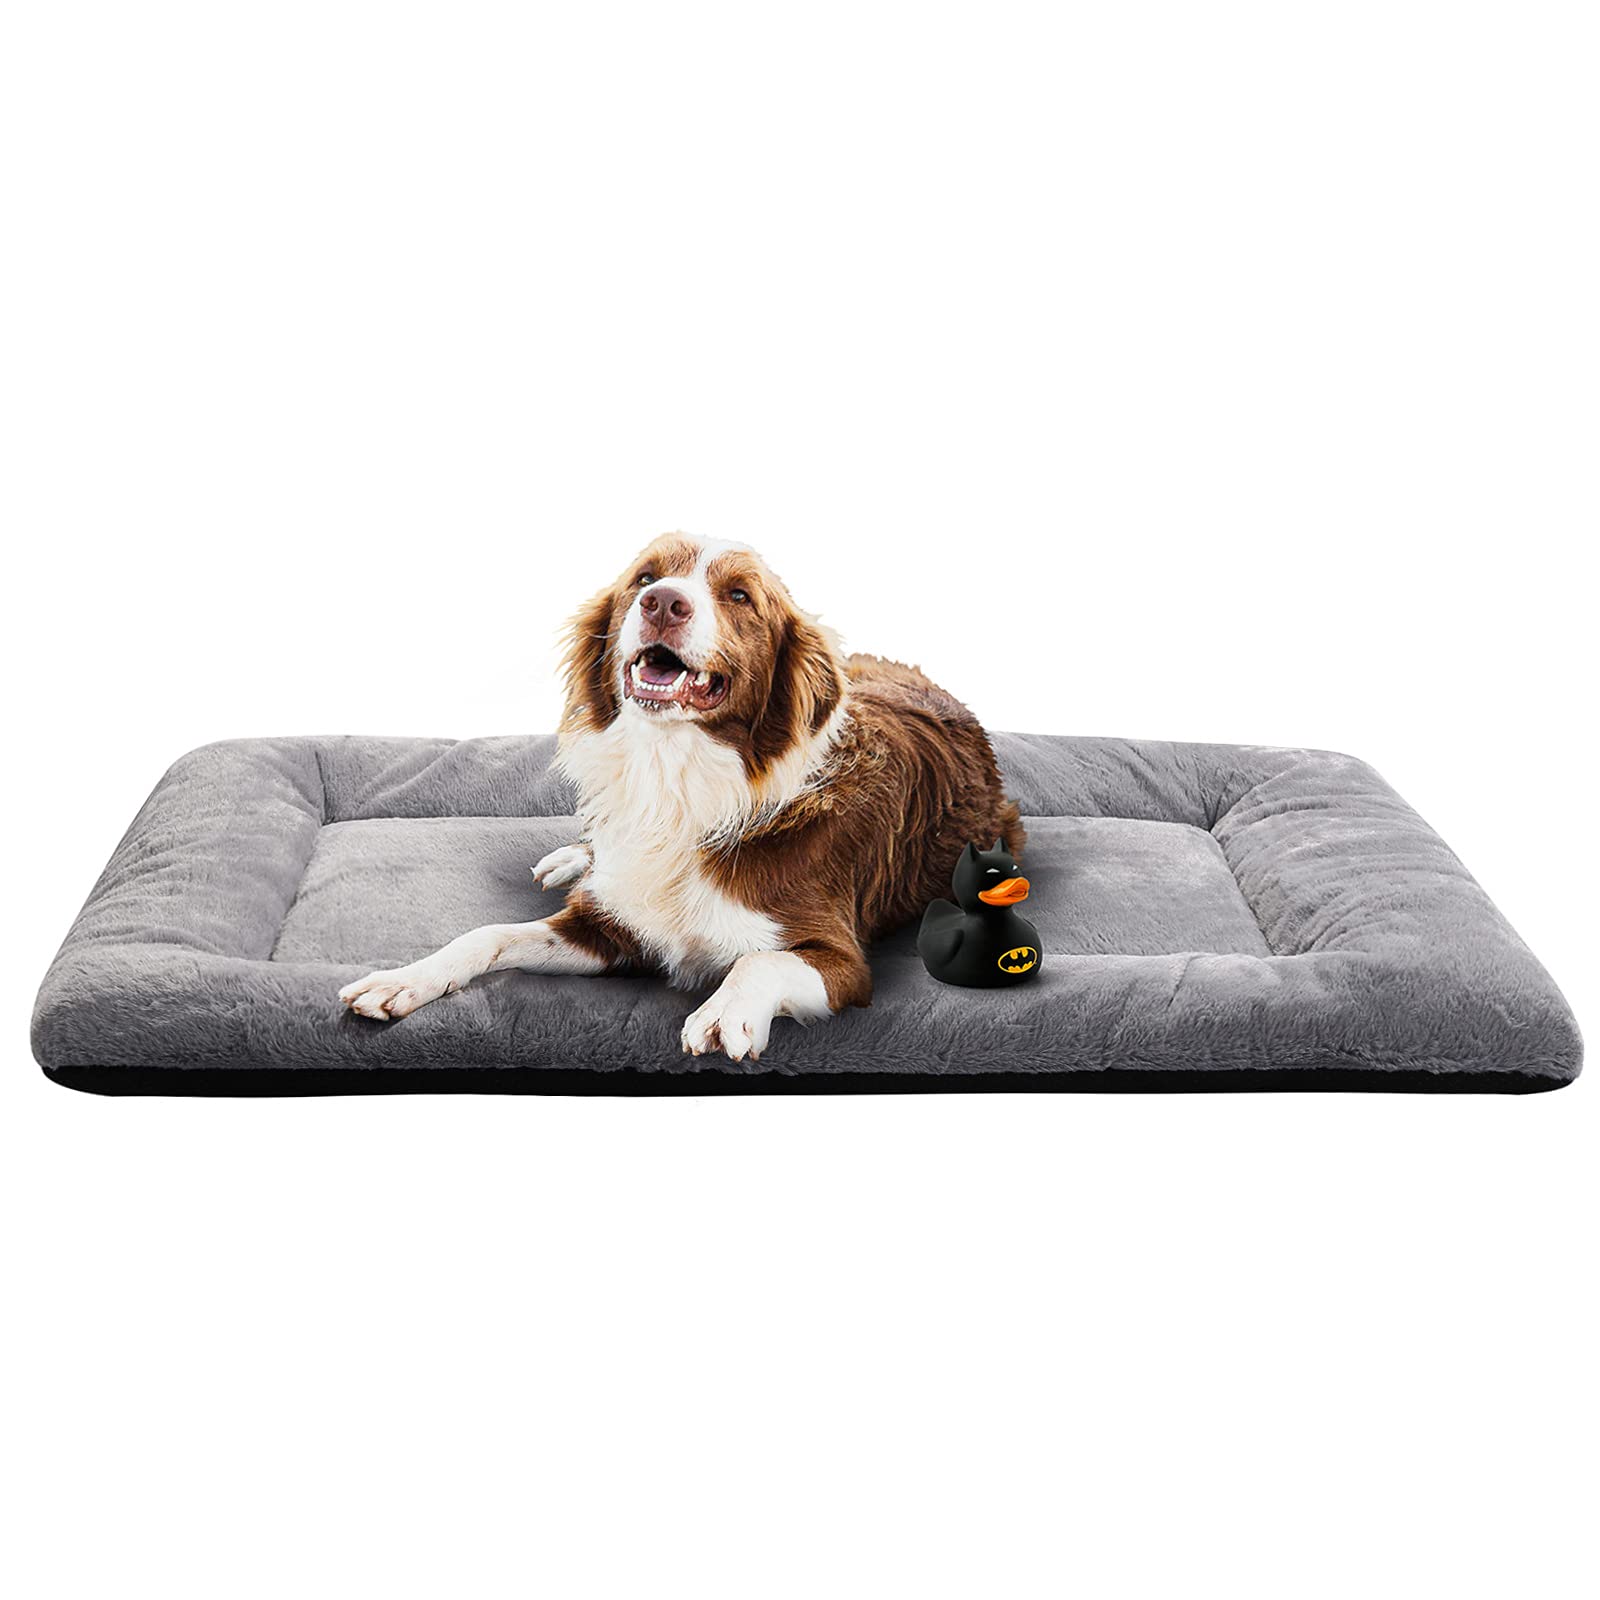 VERZEY Dog Beds Crate Pad For Extra Large Dogs Fit Metal Dog Crates,Ultra Soft Dog Crate Bed Washable & Anti-Slip Kennel Pad For Dogs C